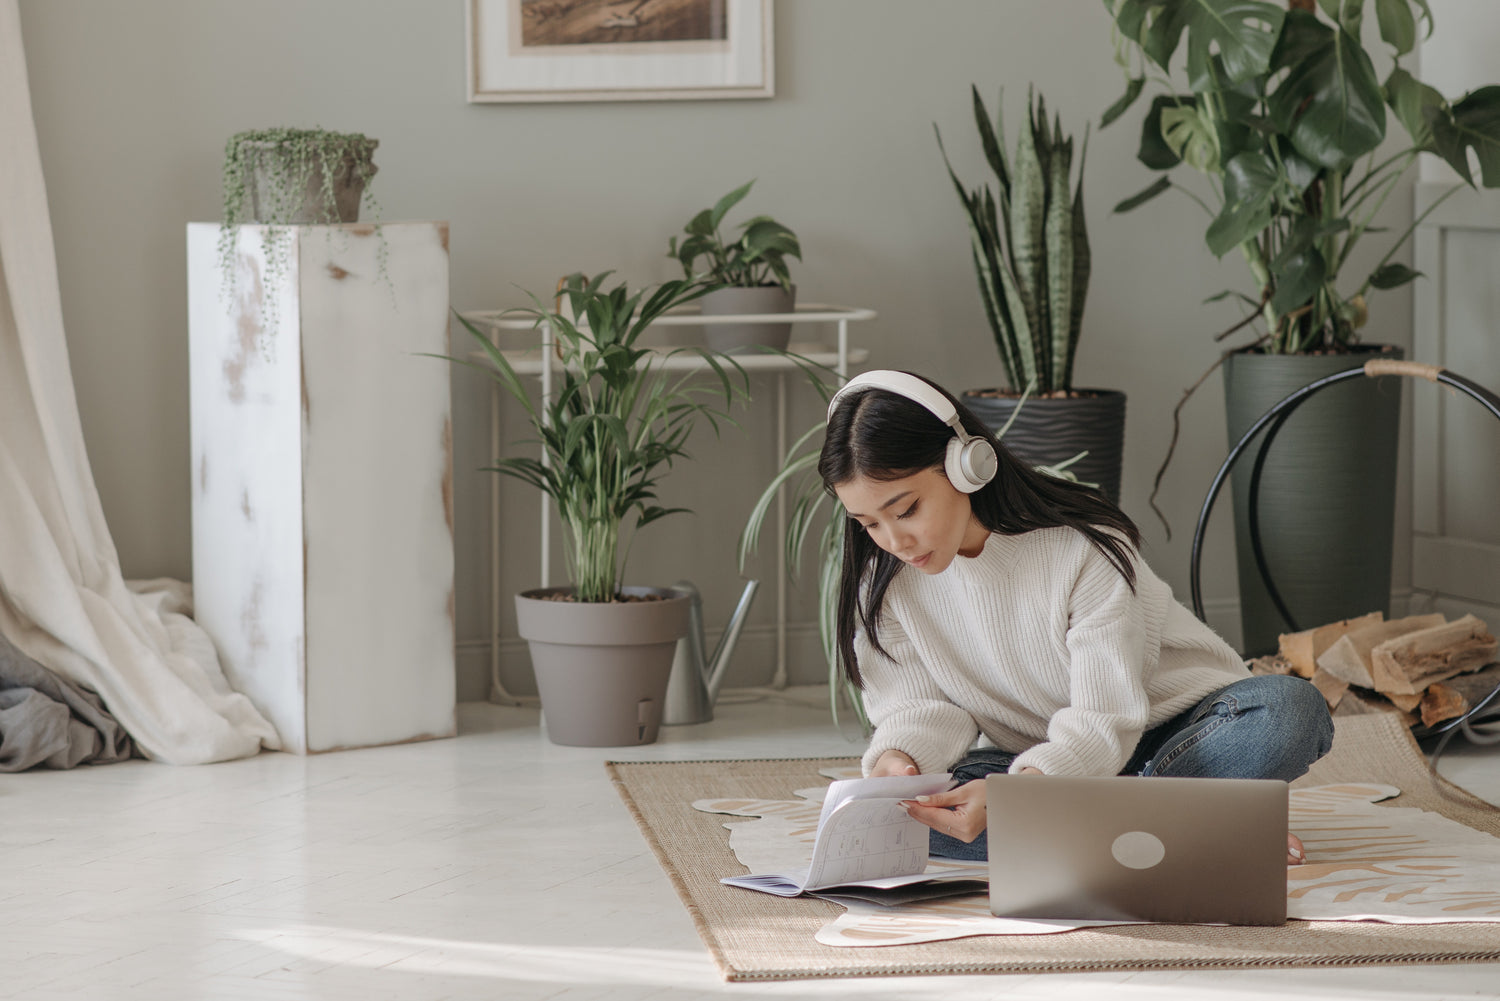 Woman wearing headphones working on her laptop in a room with plants